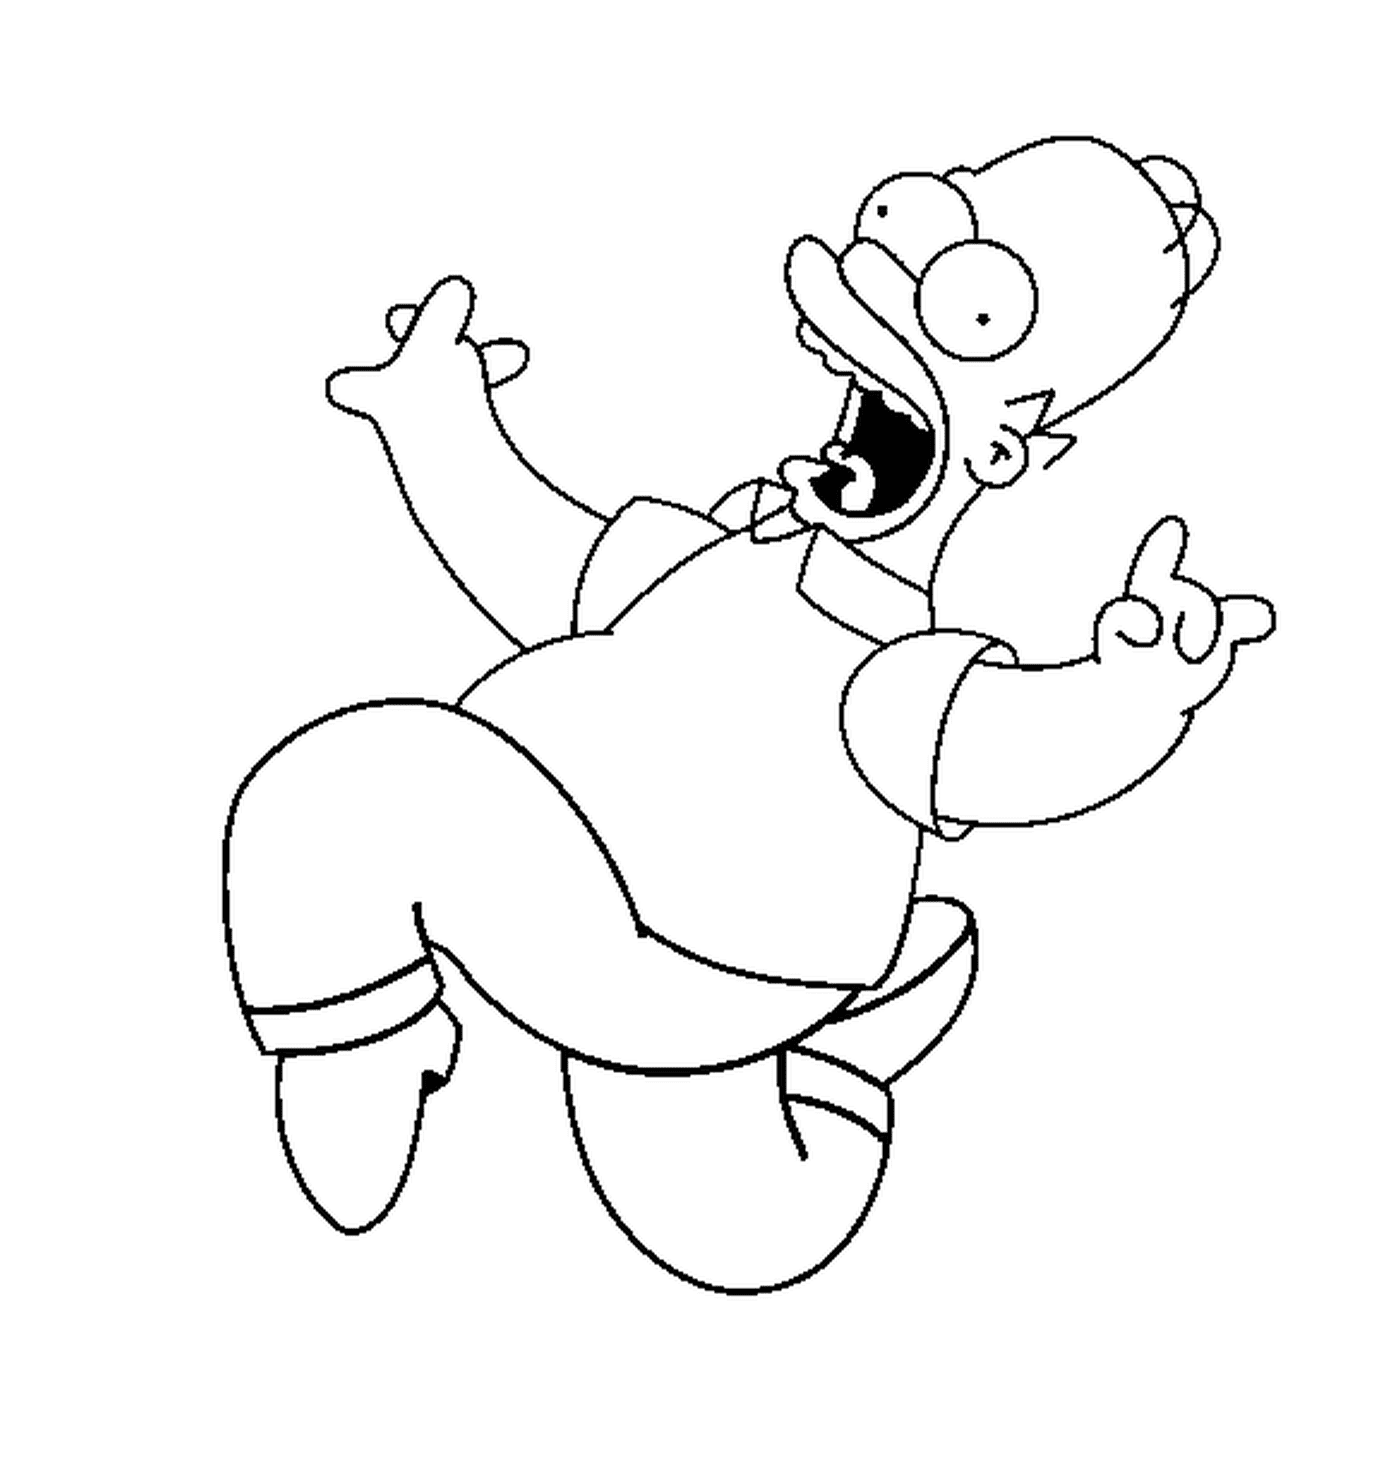  Homer Simpson jumps with joy 